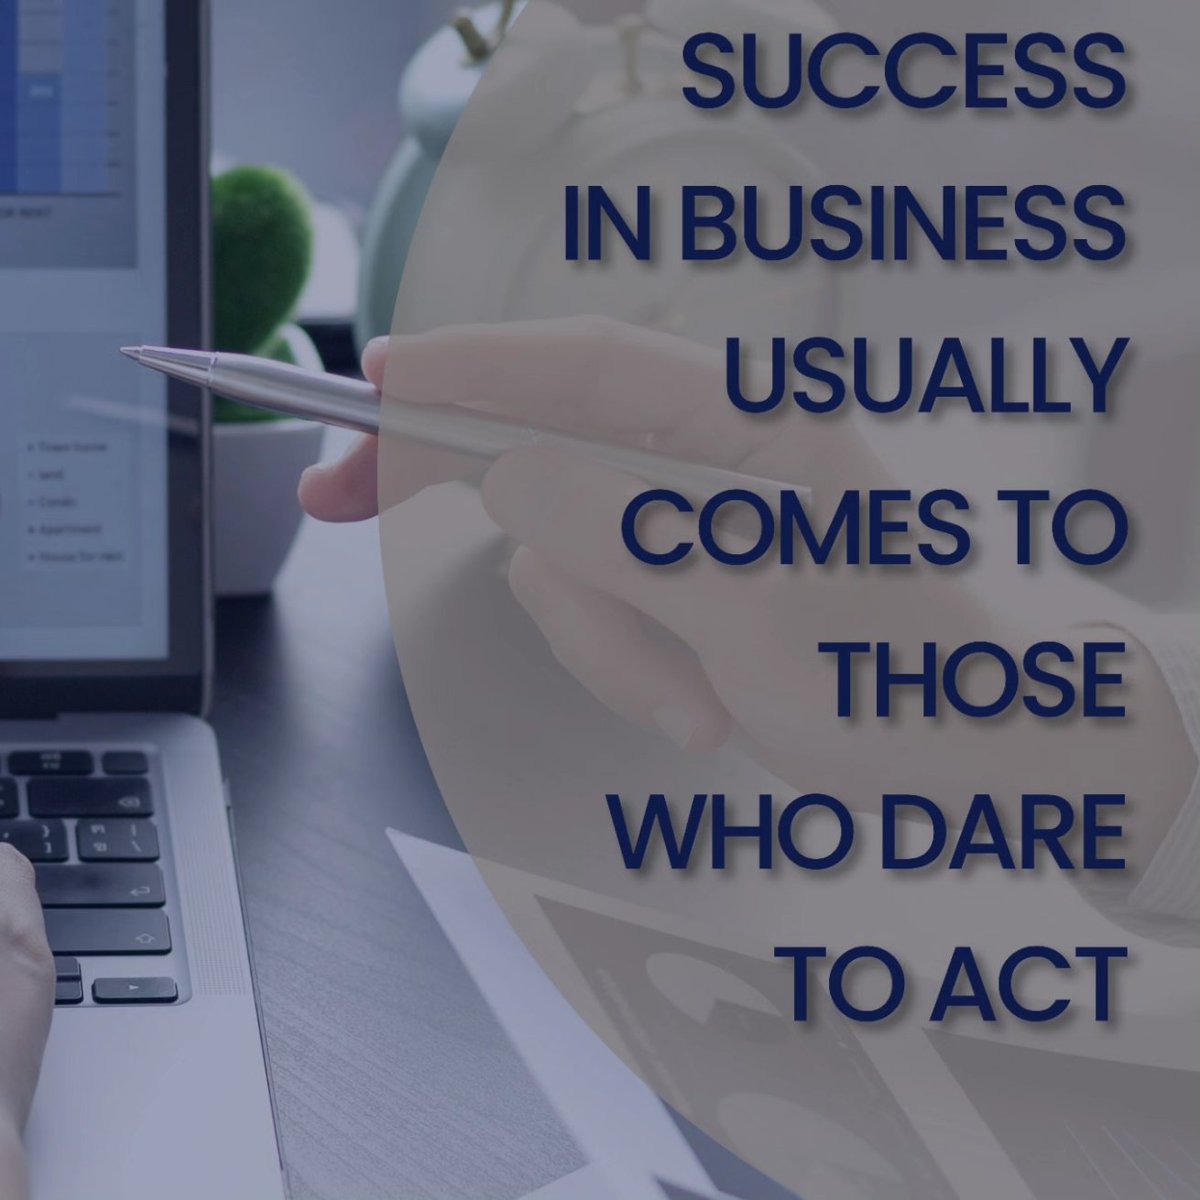 Dare to act. 

#Cmg_mediagroup#Cmg_mediagroup#successfulmindset